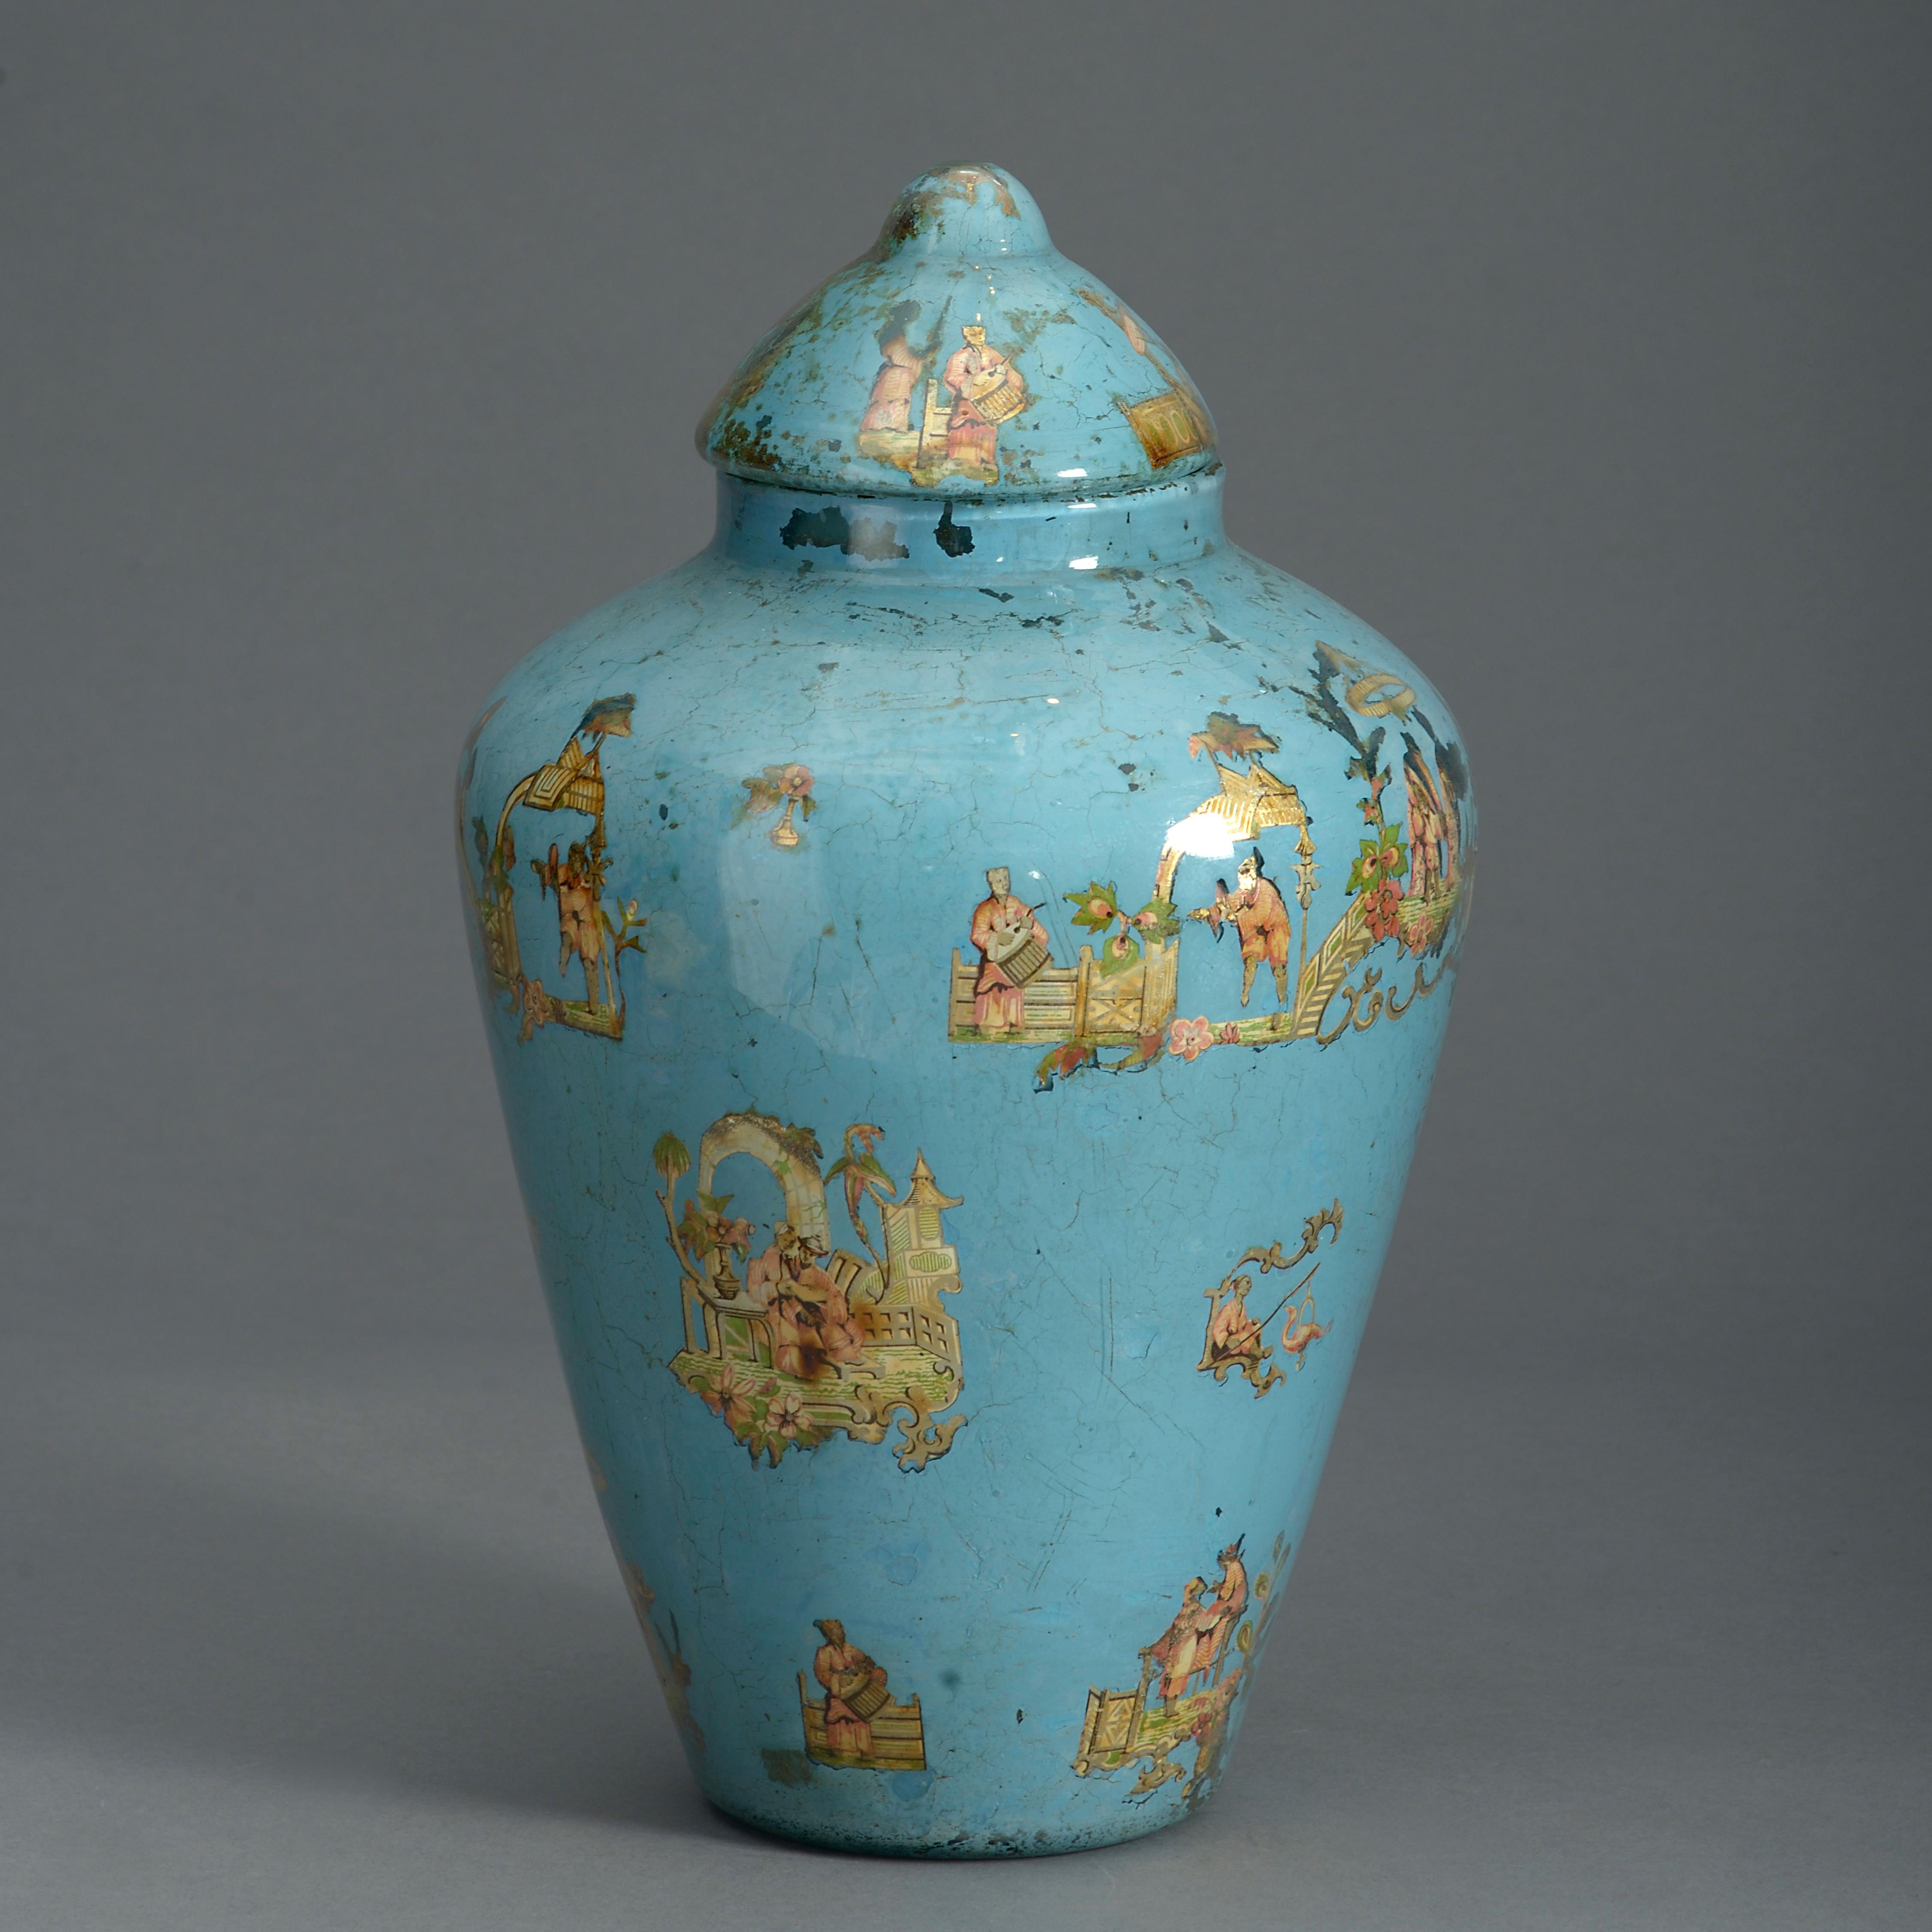 A charming mid-nineteenth century pale decalcomania vase and domed lid, decorated throughout with chinoiseries on a pale blue ground.

This is an unusual example of decalcomania. The decoupage work closely resembles arte povera of the eighteenth